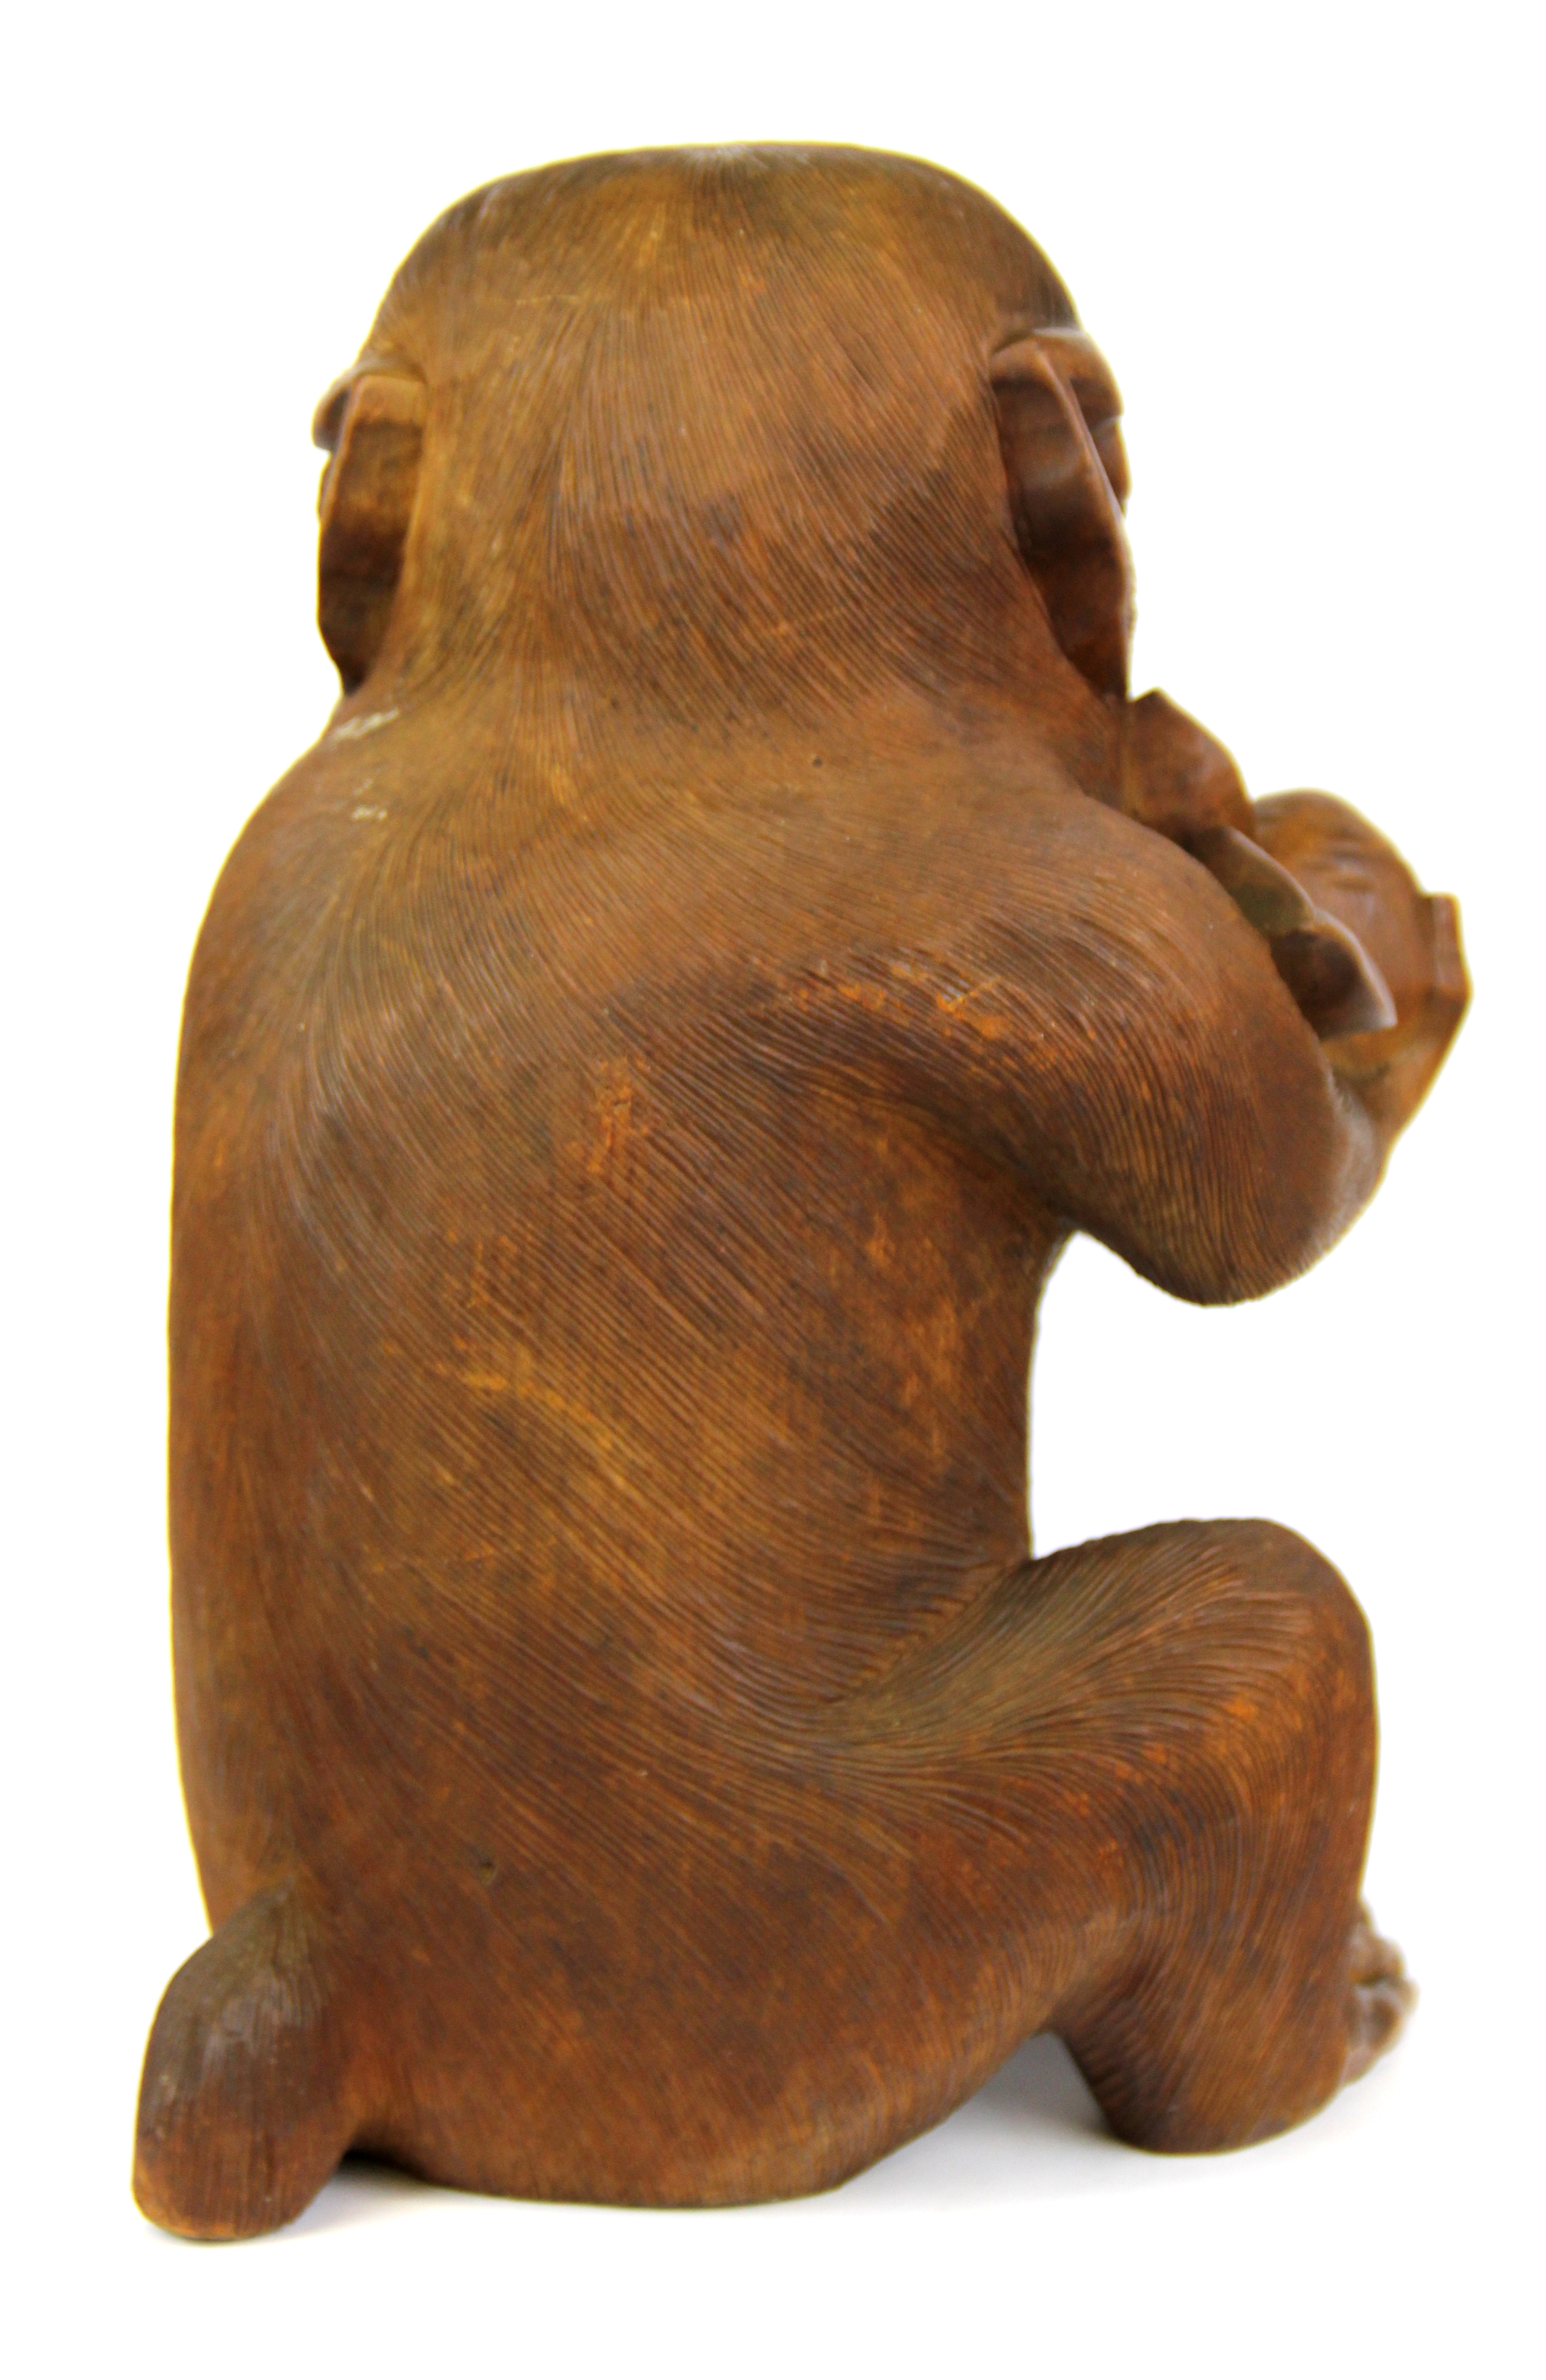 An Oriental carved wooden monkey figure with glass eyes (possibly Japanese), H. 30cm. - Image 2 of 2